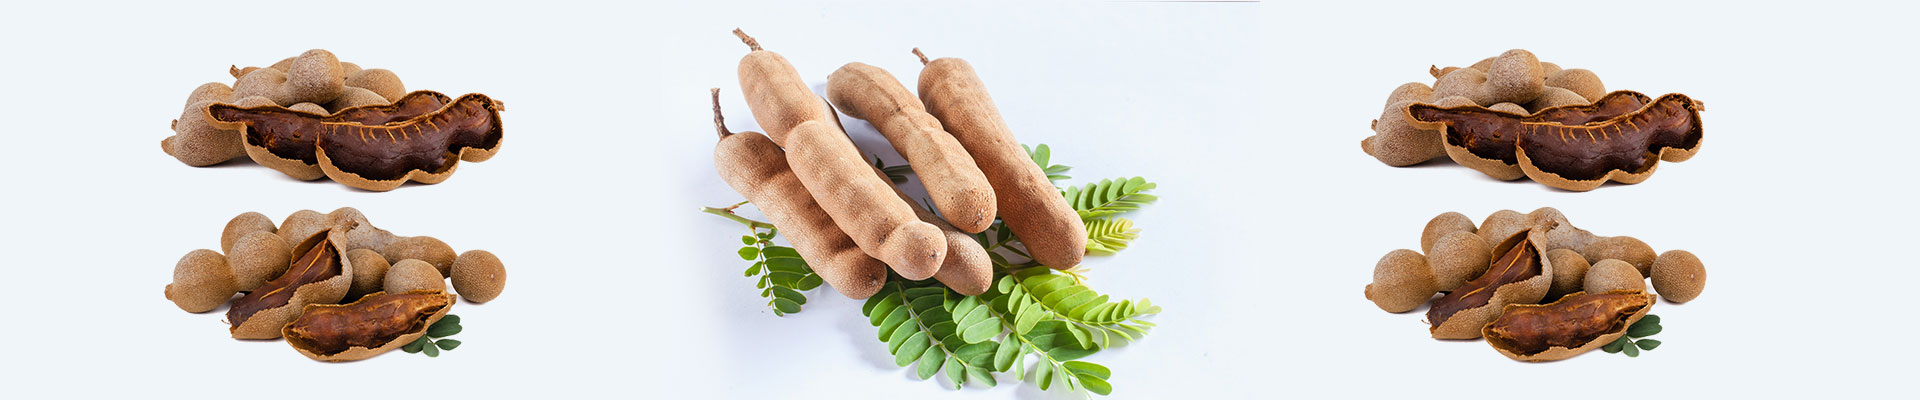 TAMARIND-THE SPICE OF LIFE